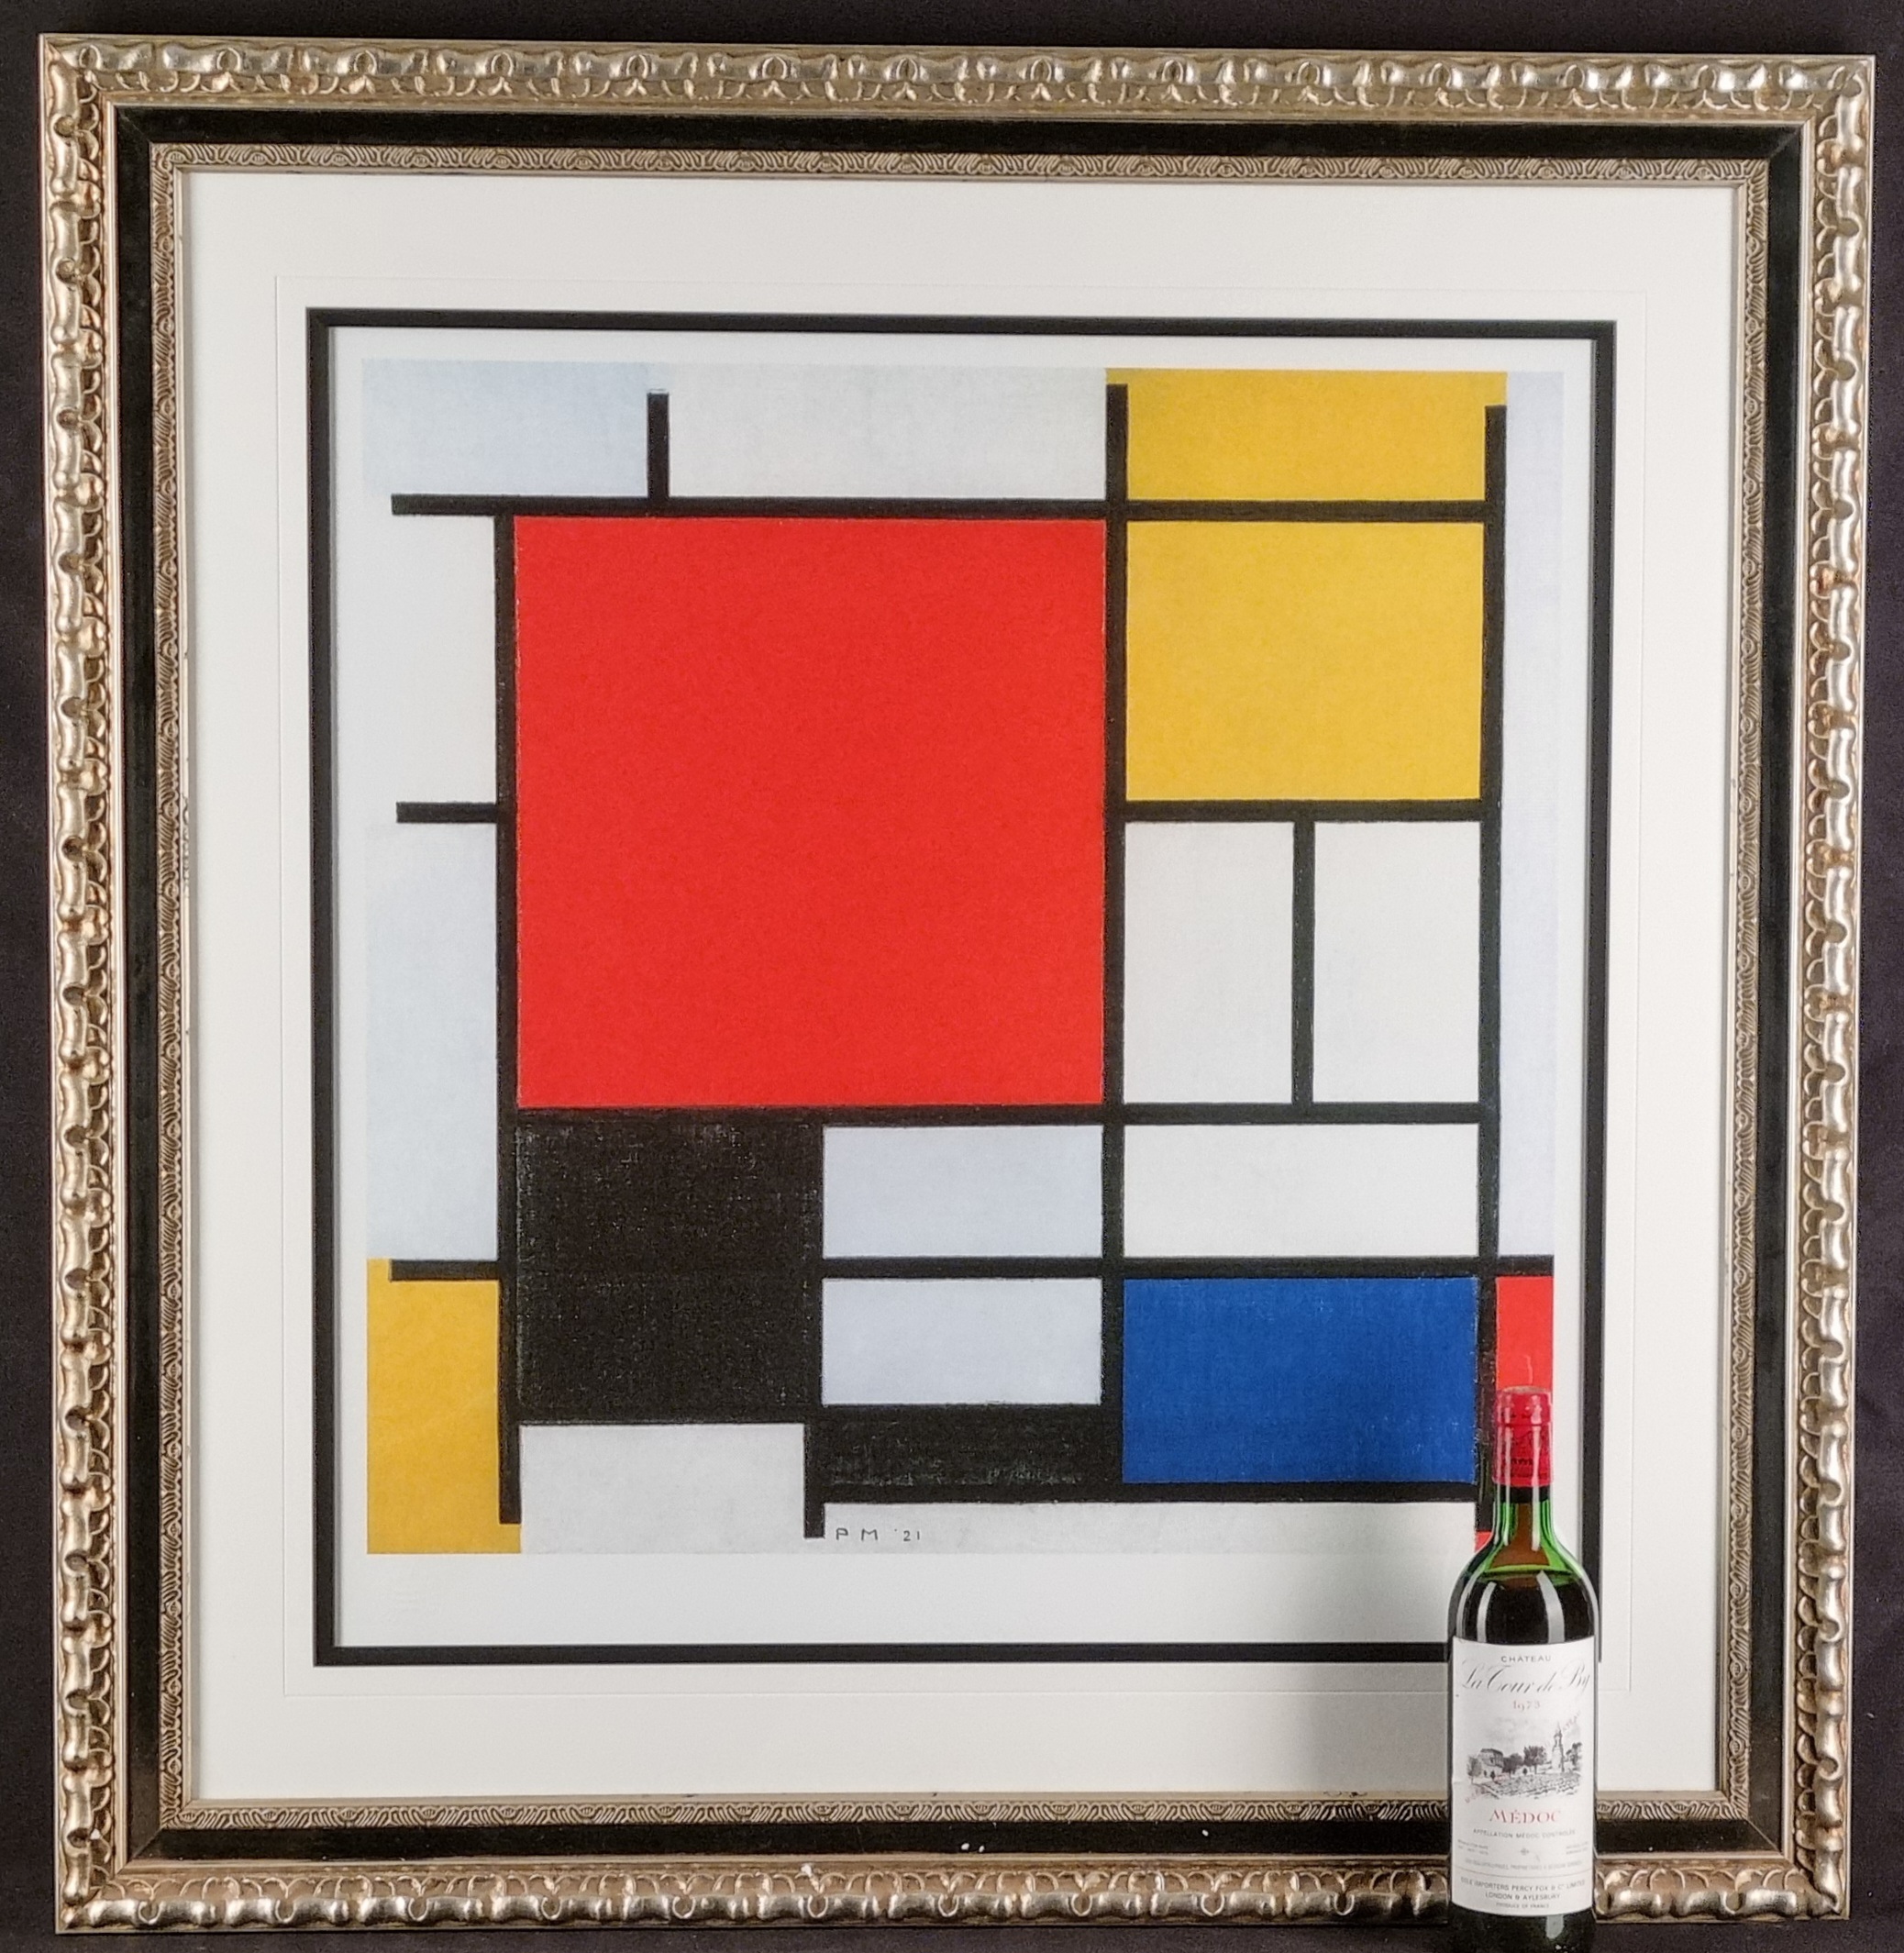 Piet Mondrian Rare Limited Edition. One of 85 only from the Composition Series